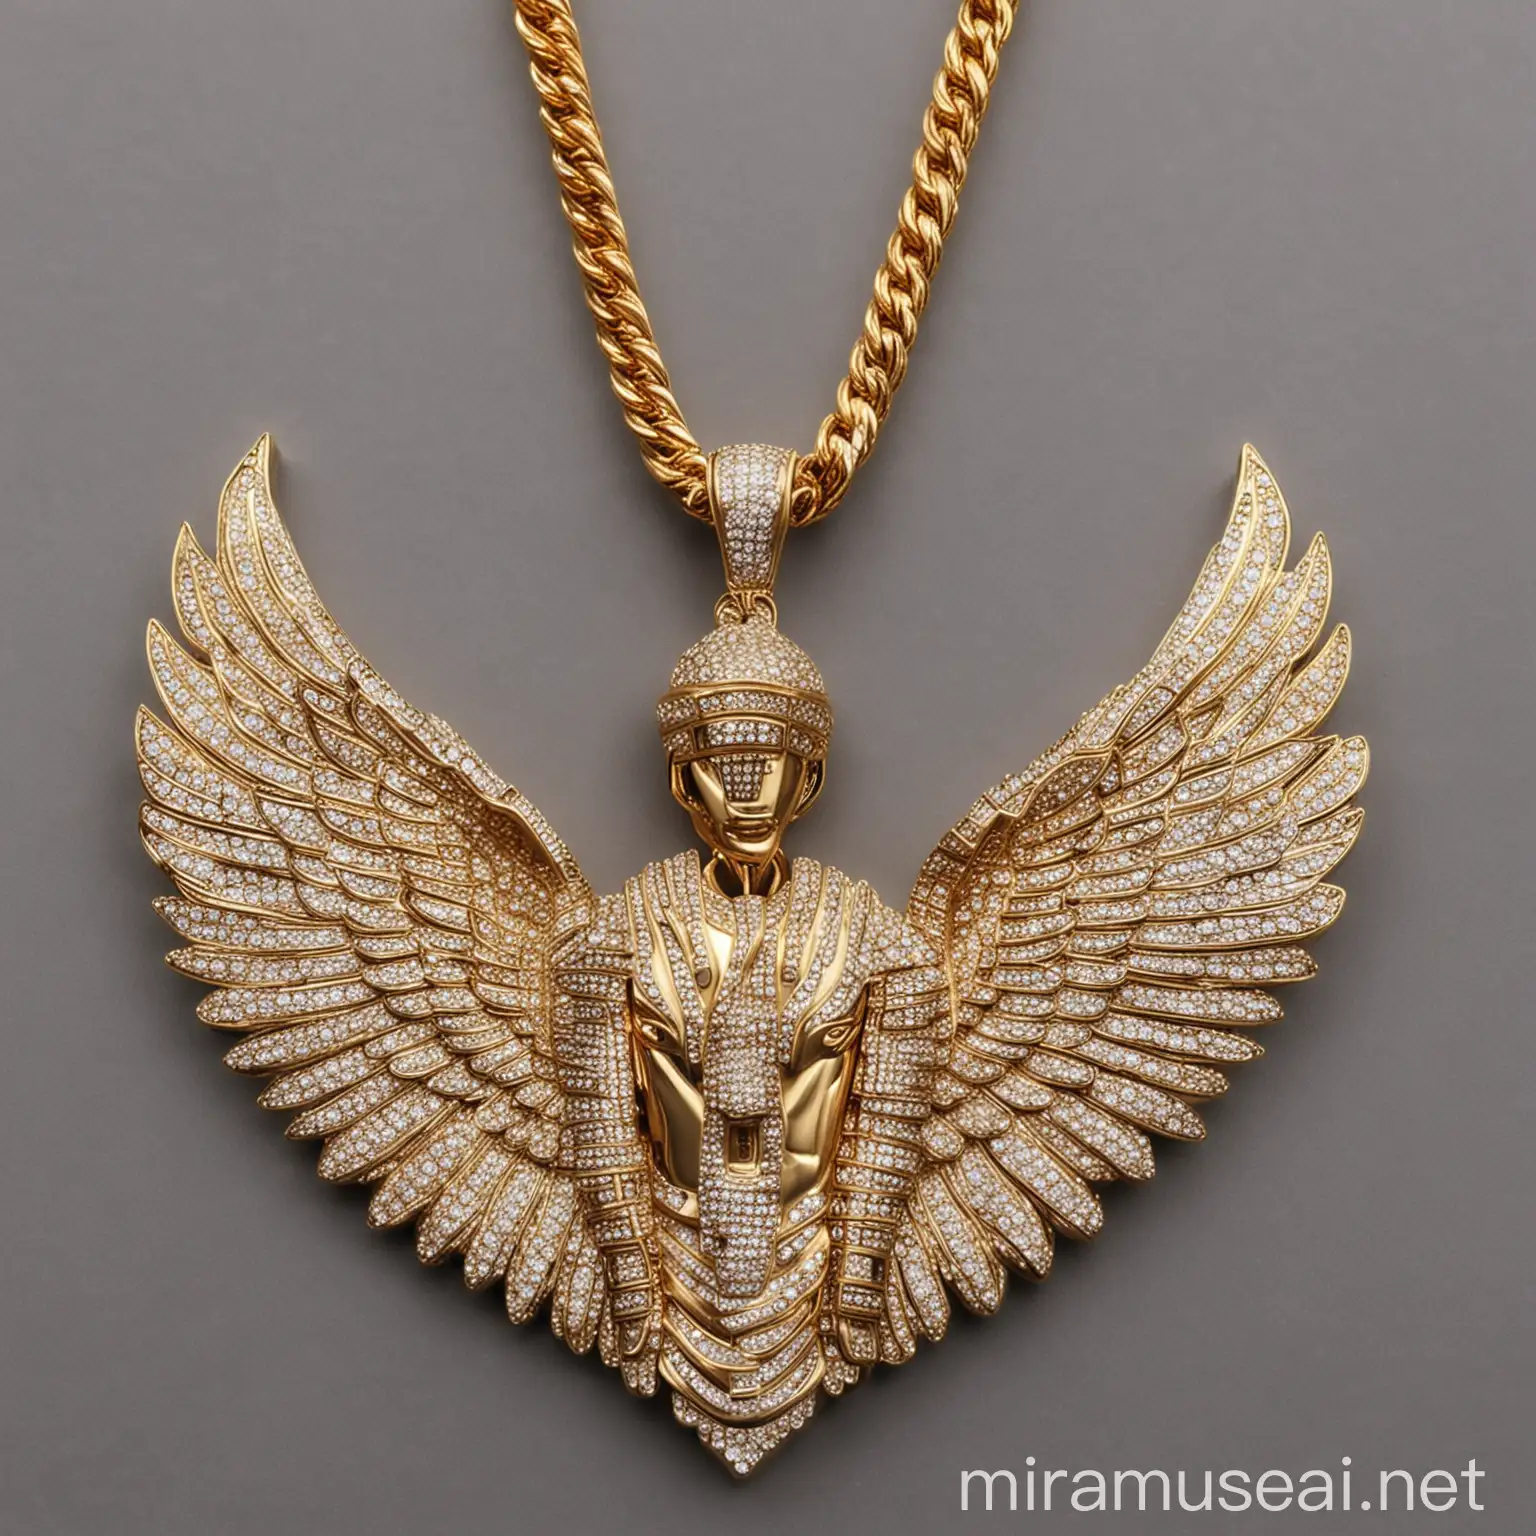 HipHop Portrait Bold Wings and IcedOut Golden Pendants